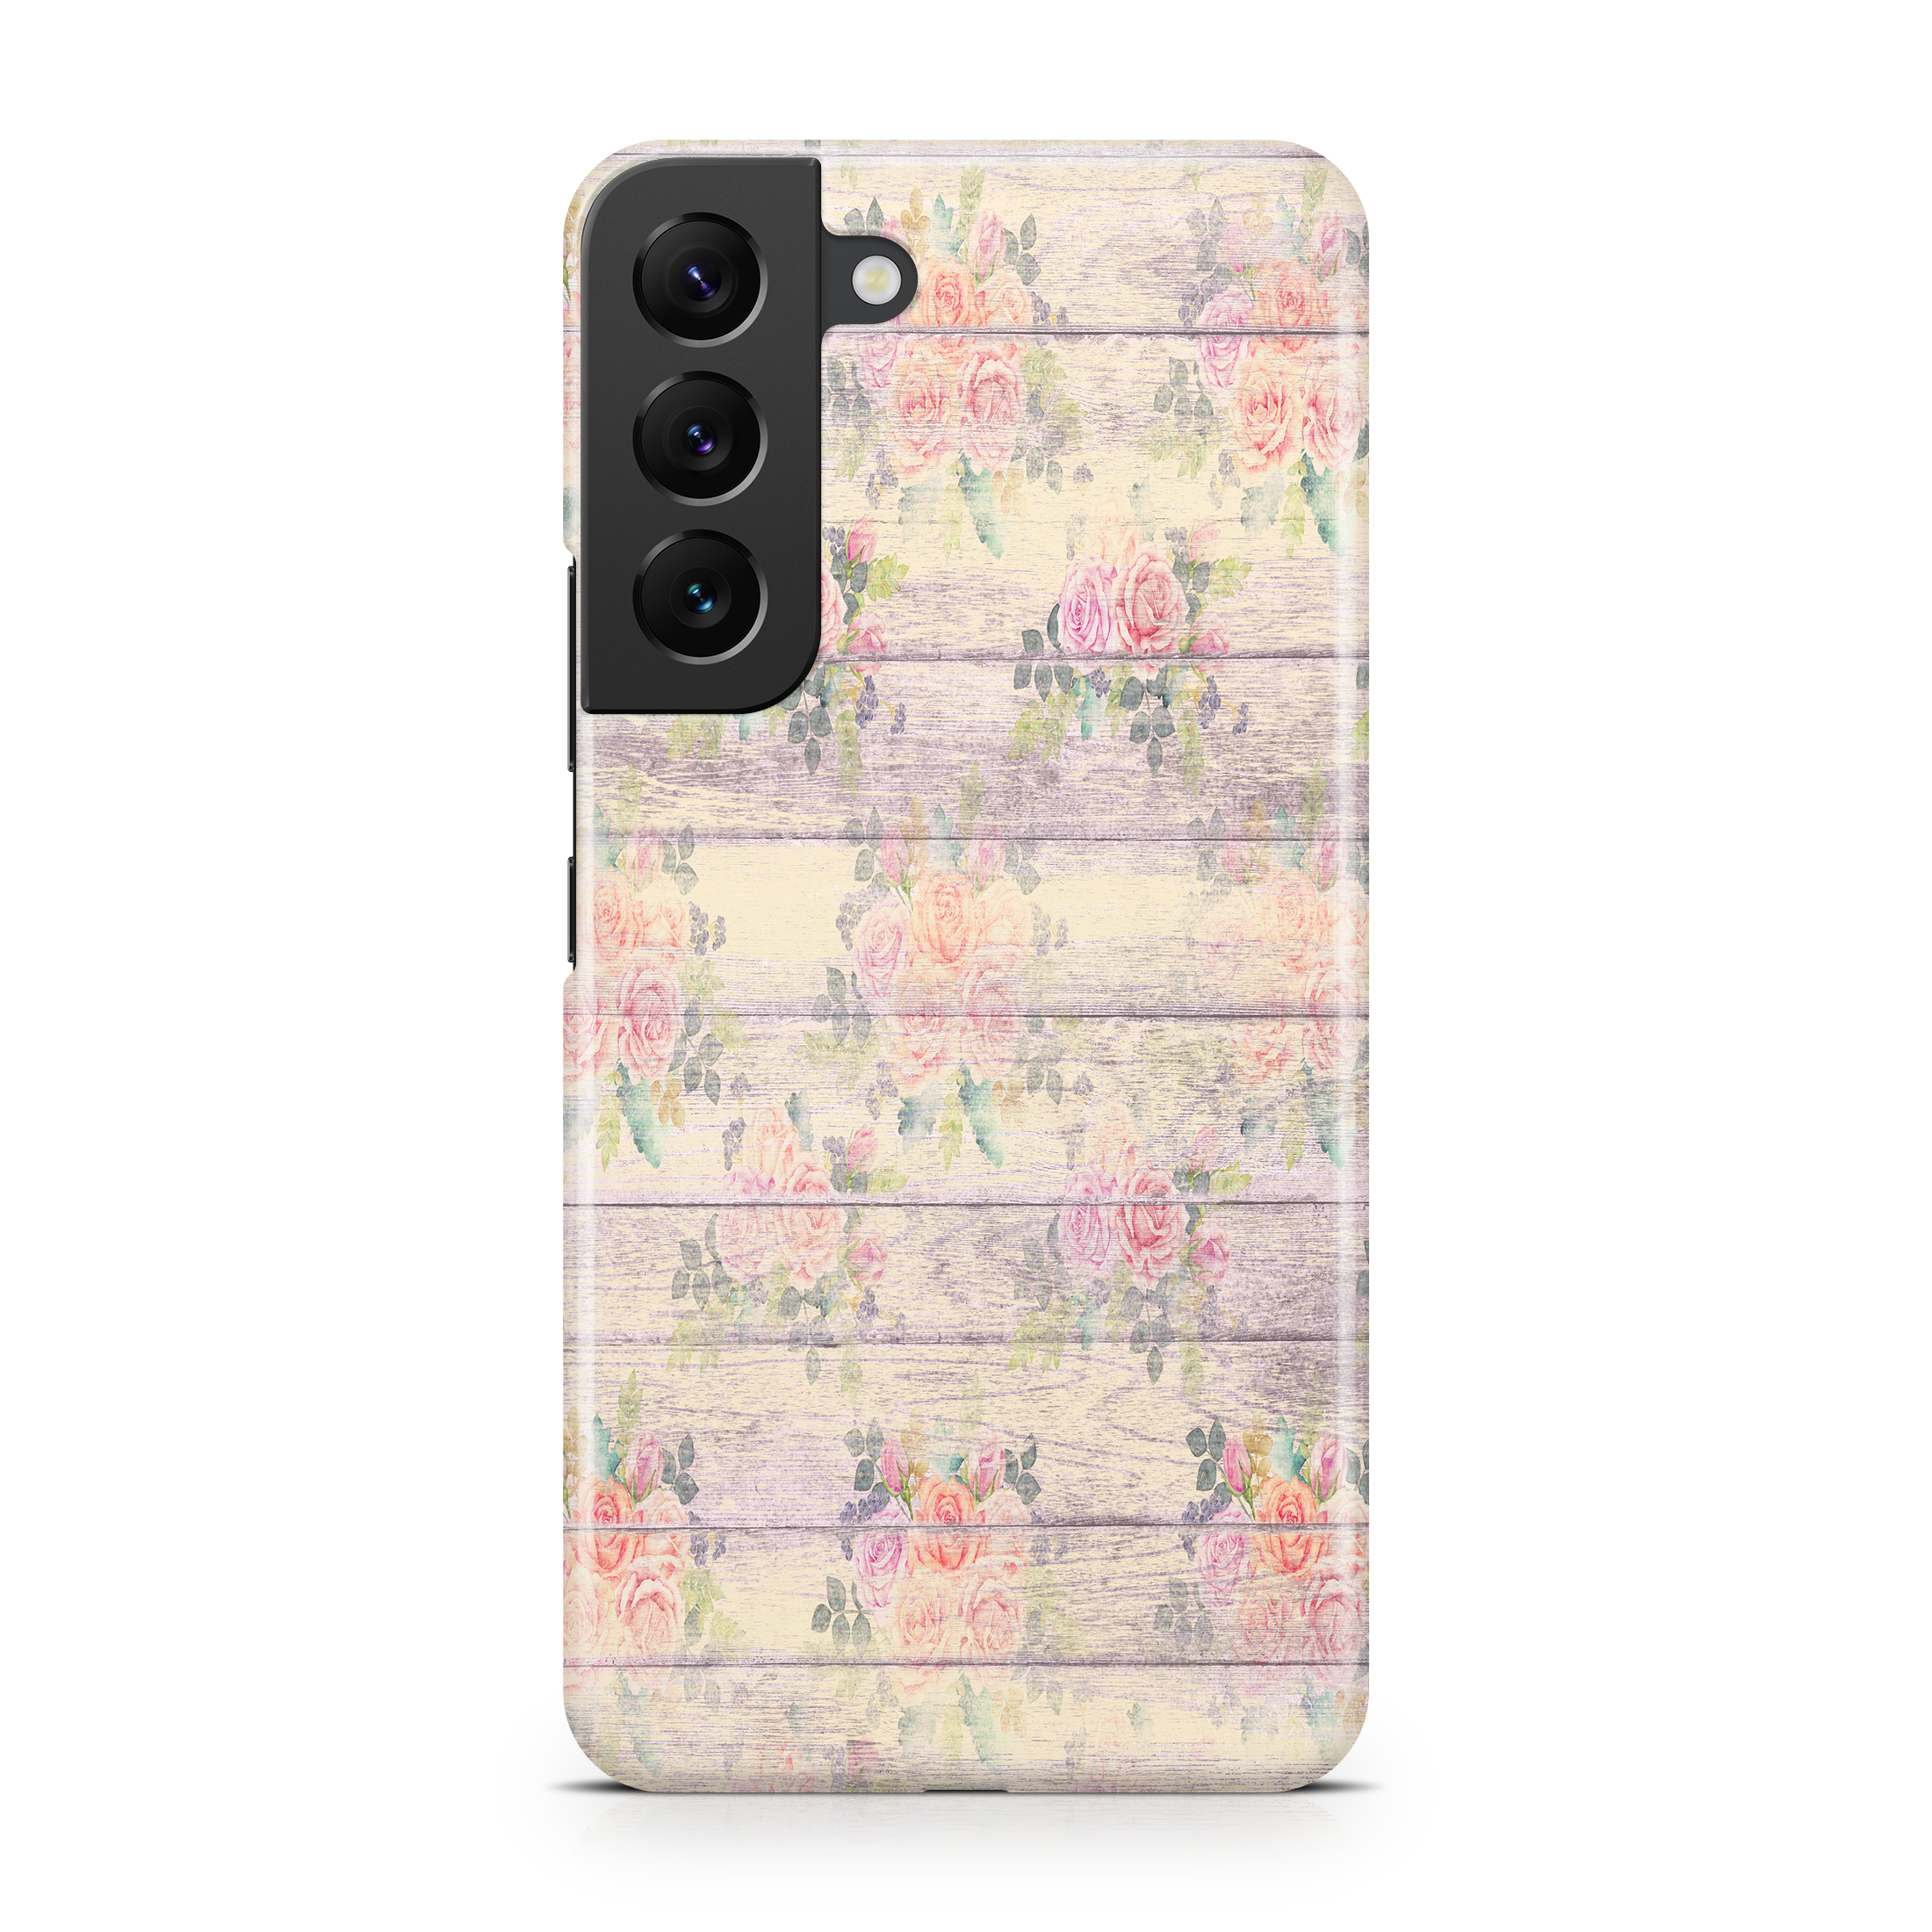 Shabby Chic Rosewood - Samsung phone case designs by CaseSwagger